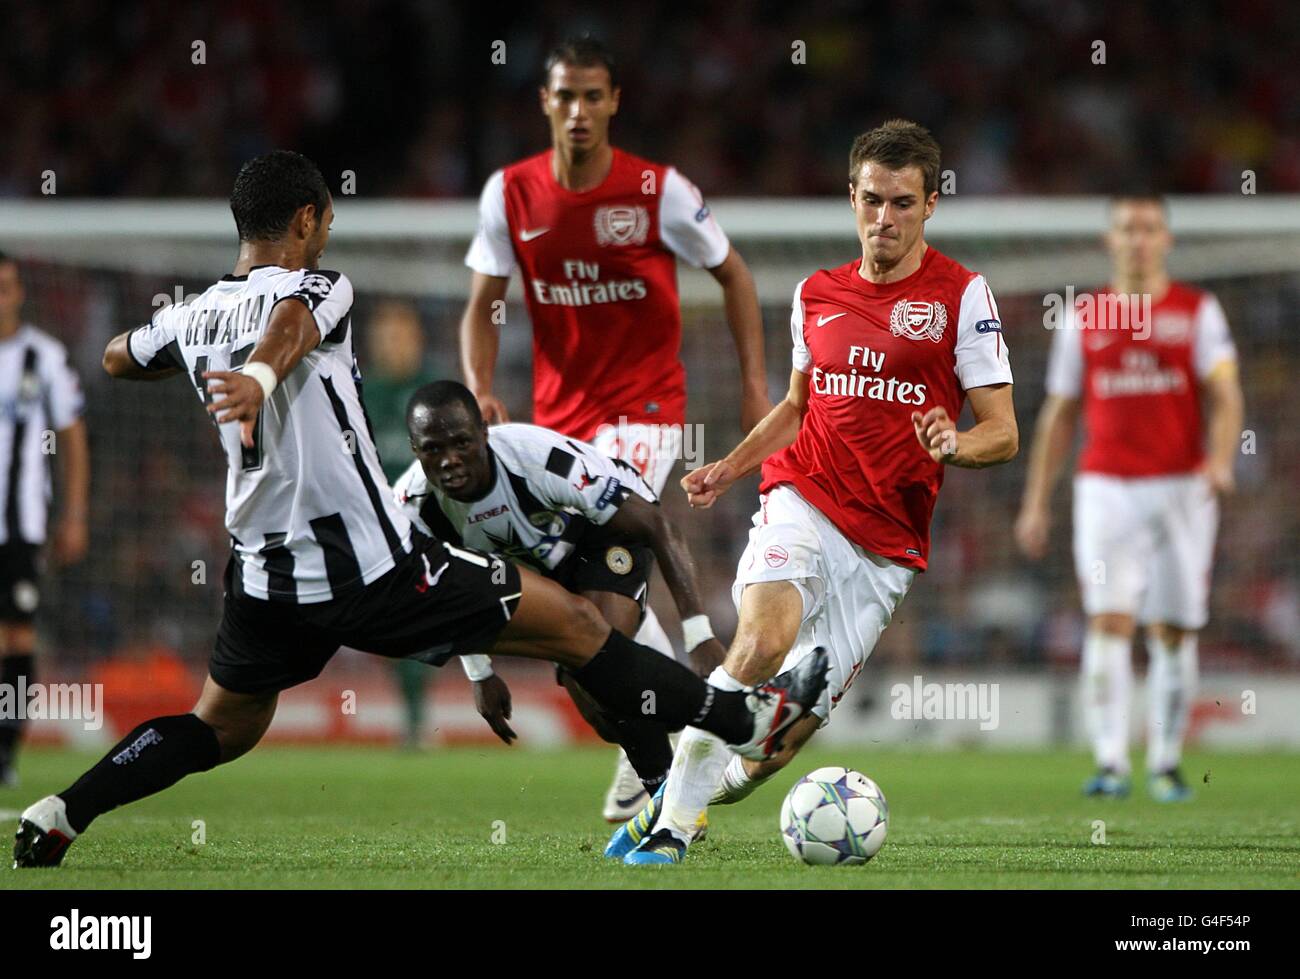 Soccer - UEFA Champions League - Play Offs - First Leg - Arsenal v Udinese - Emirates Stadium. Arsenal's Aaron Ramsey (2nd right) takes on Udinese's Mehdi Benatia in a battle for the ball Stock Photo